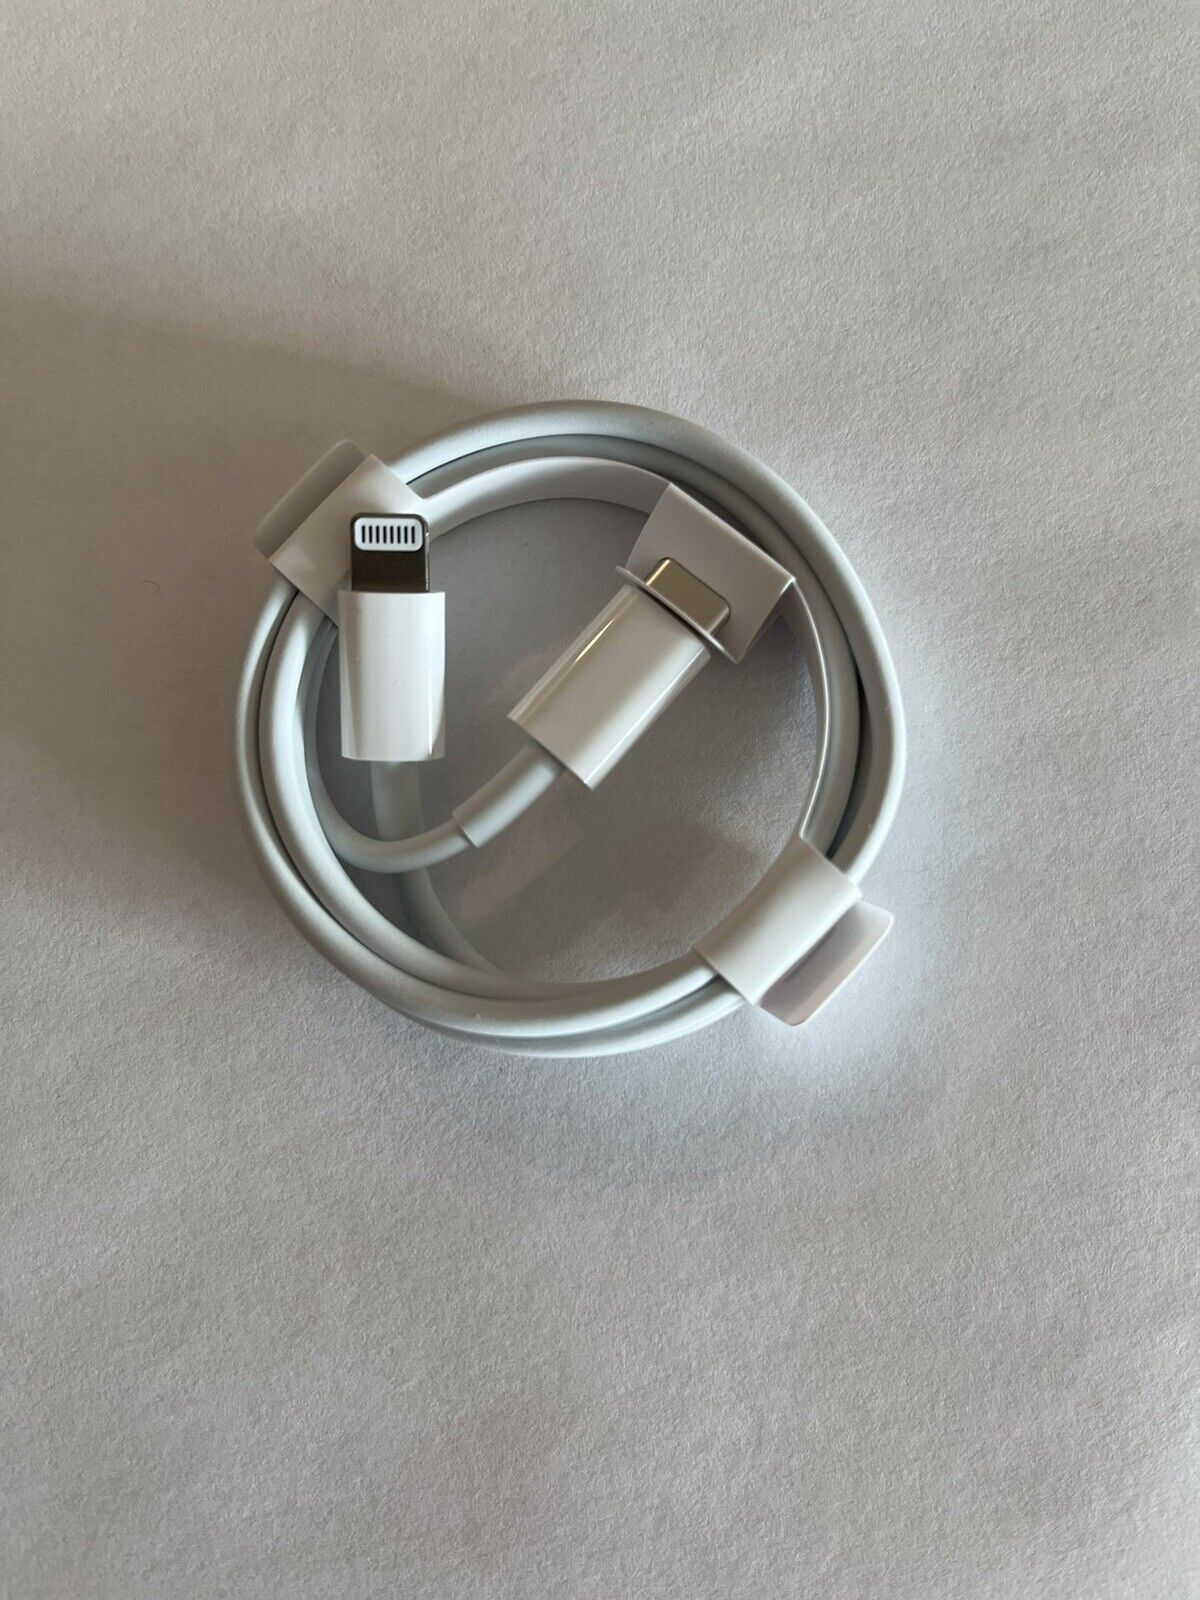 Original Genuine OEM Apple Charger Cable / Lightning To Type C